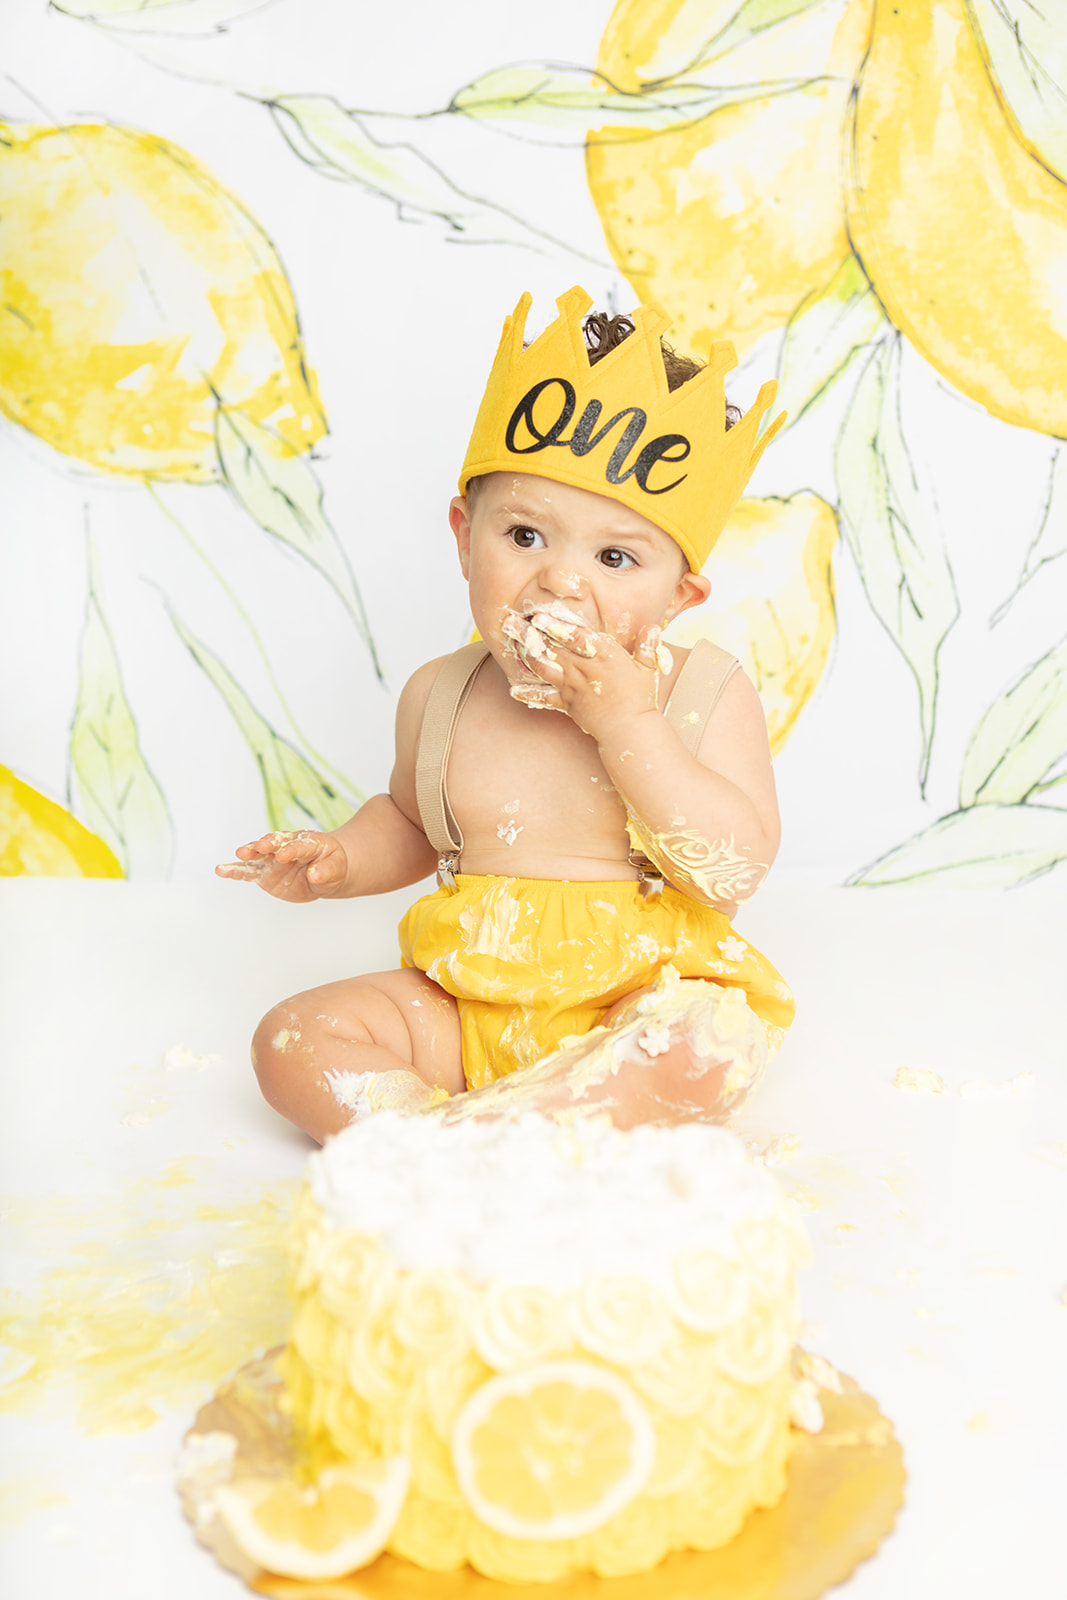 A one year-old little boy smashes cake into his mouth. He is absolutely covered in cake and icing! In the foreground of the picture sits a beautiful, ombre lemon smash cake. The backdrop is a handpainted lemon backdrop by Heidi Hope.